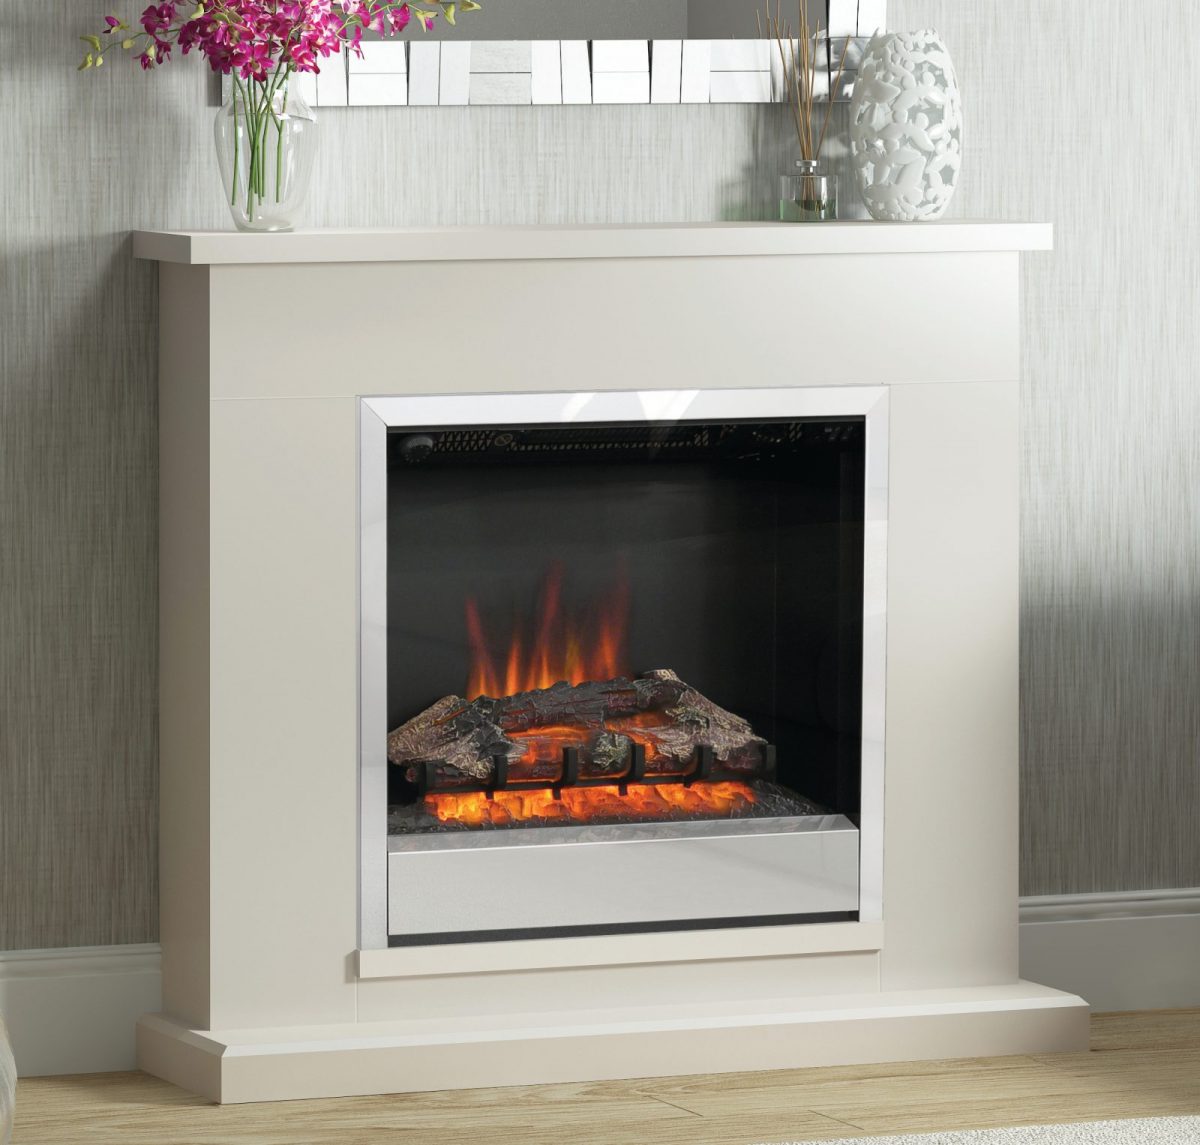 40″ Elsham fireplace in Pearlescent Cashmere painted finish with Chrome Finish Electric Fire